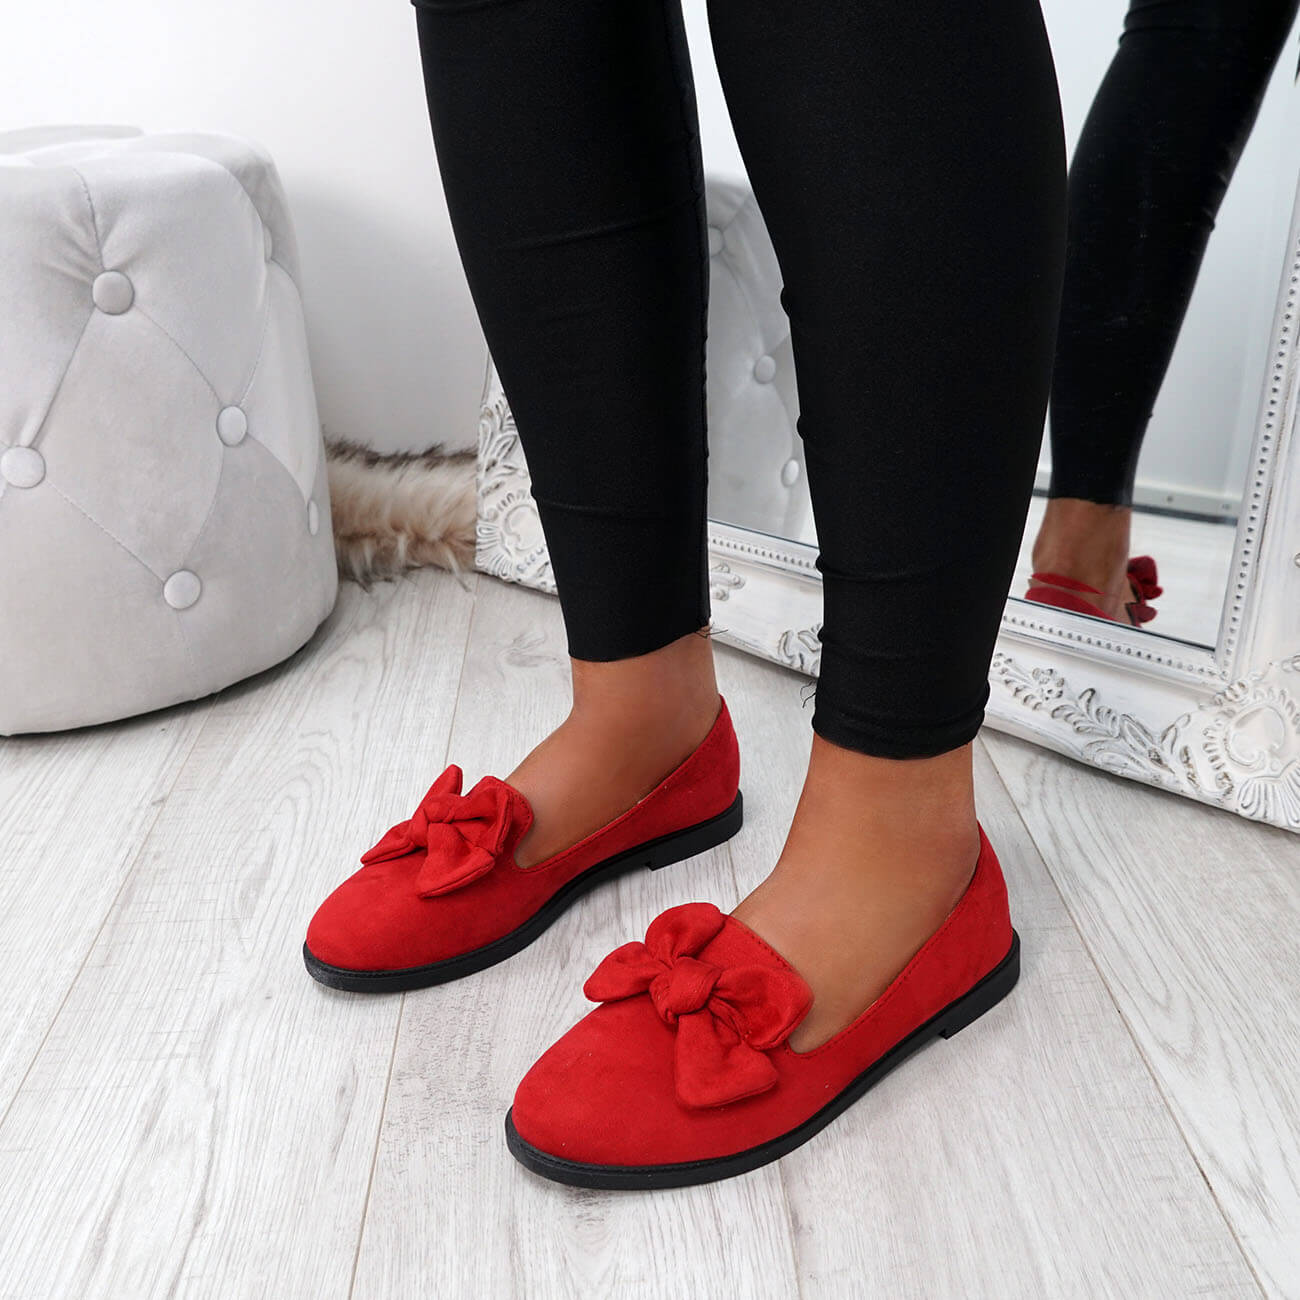 Women Slip on Loafers Women's New Suede Flat Shoes in Spring and Summer  Bowknot Fashion Sandals Black/Blue/Red/Green (A01-Red, 9)